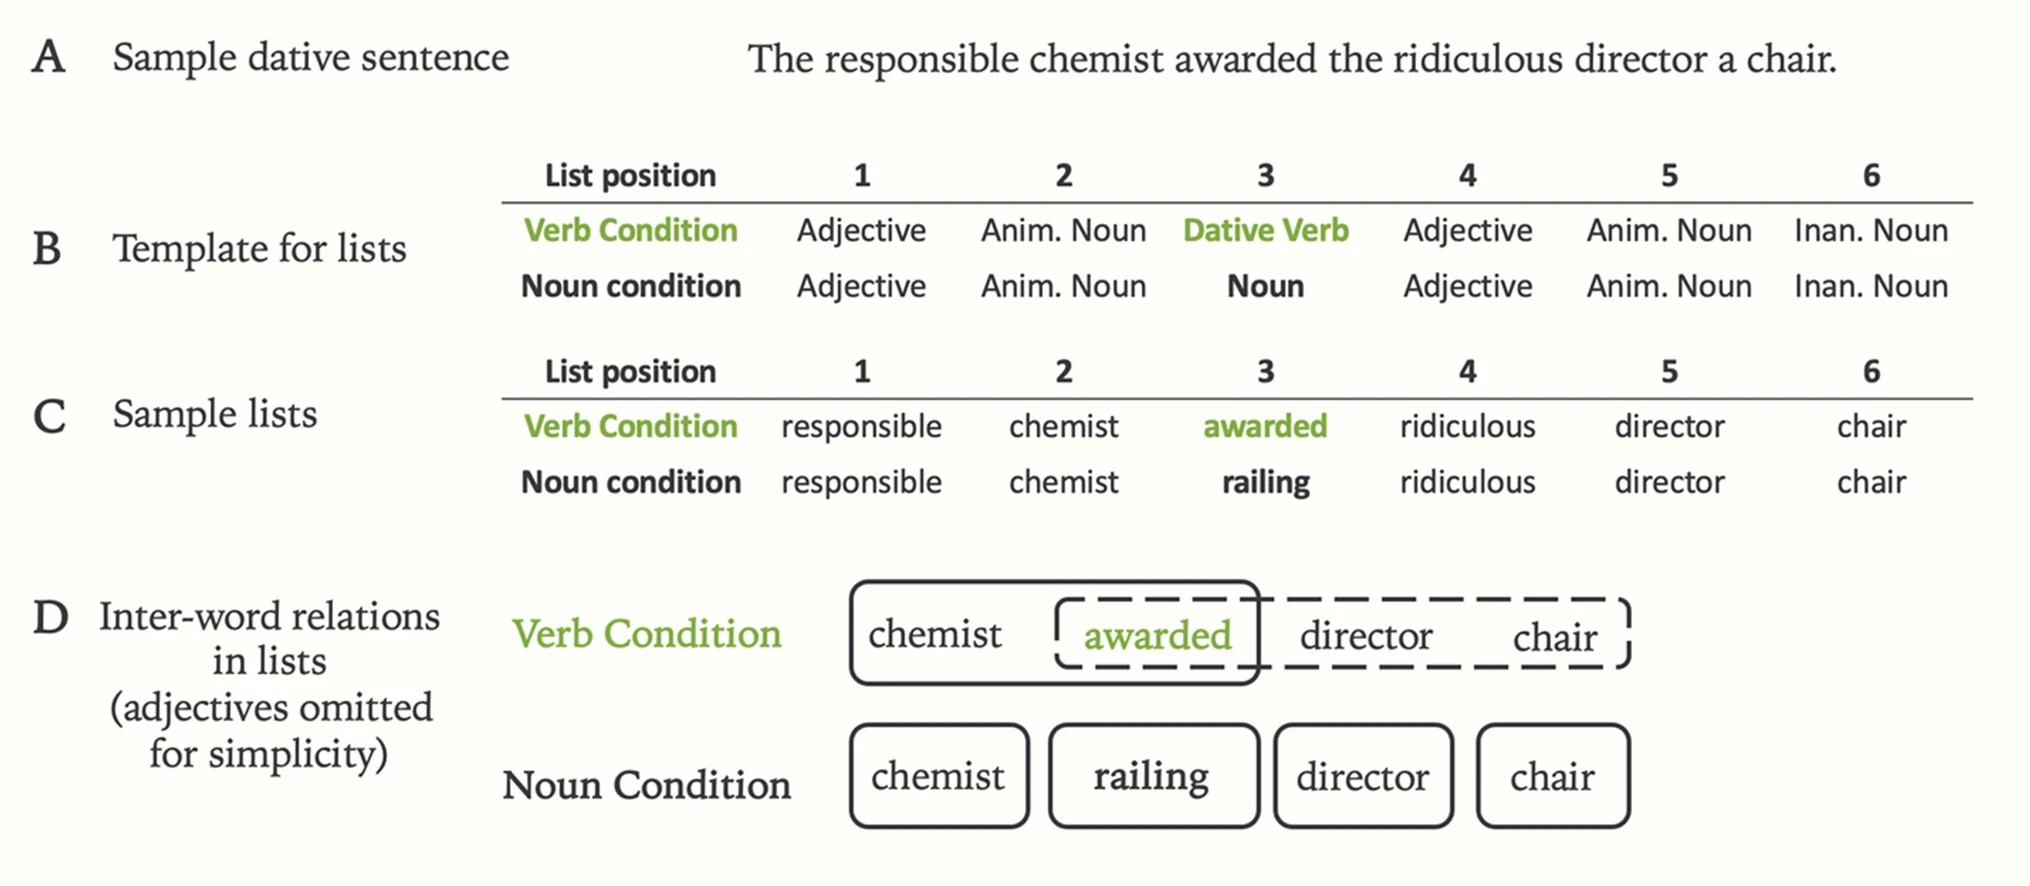 A figure showing the processing of converting a sample dative sentence into a sample list. The example sentence is “The responsible chemist awarded the ridiculous director a chair.” Taking out articles produces the list for the verb condition in the experiment, which is “responsible chemist awarded ridiculous director chair.” In the noun condition, the authors swapped the verb of the list out for another noun, here producing “responsible chemist railing ridiculous director chair.” The diagram also shows that every other list followed this same pattern of adjective, animate noun, verb/noun, adjective, animate noun, and then inanimate noun.